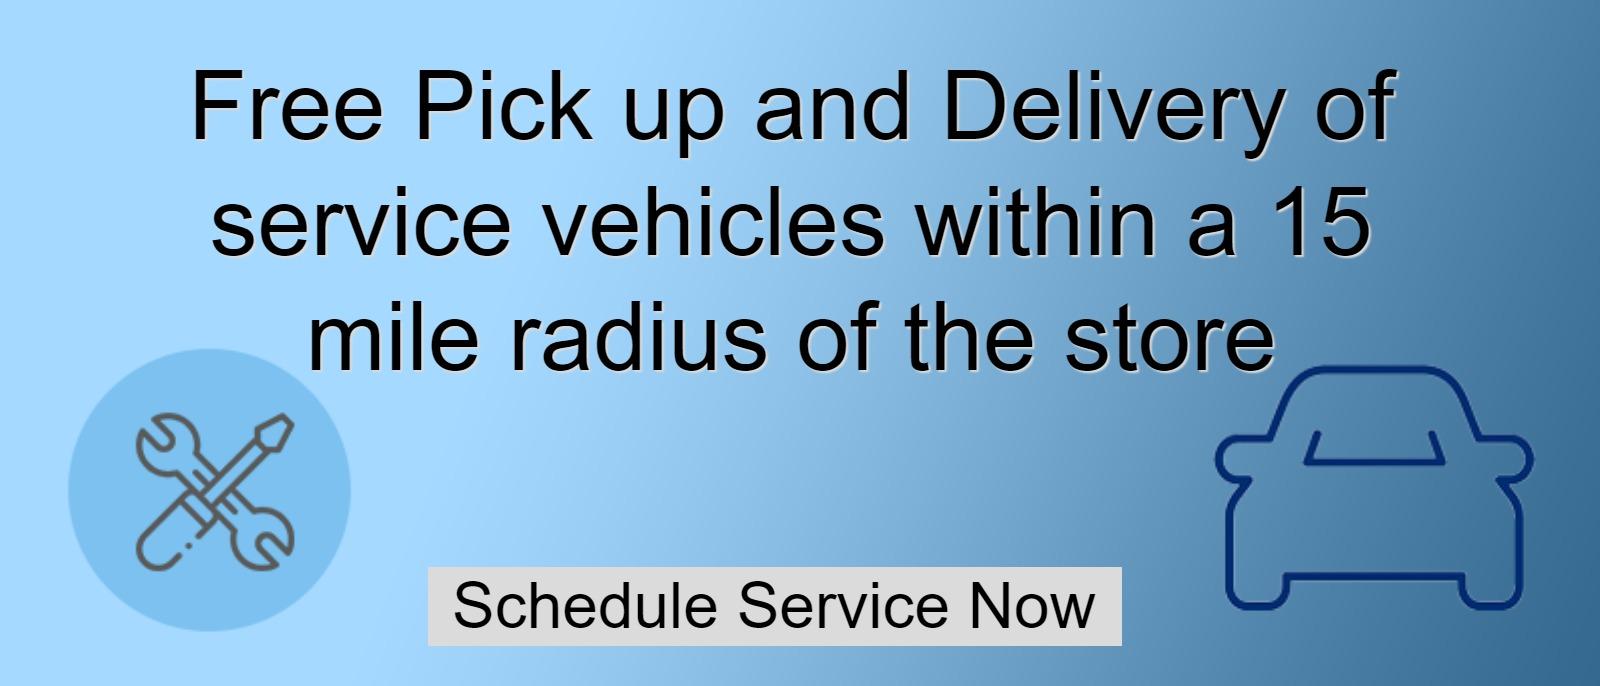 Free Pick up and Delivery of service vehicles within a 15 mile radius of the store.